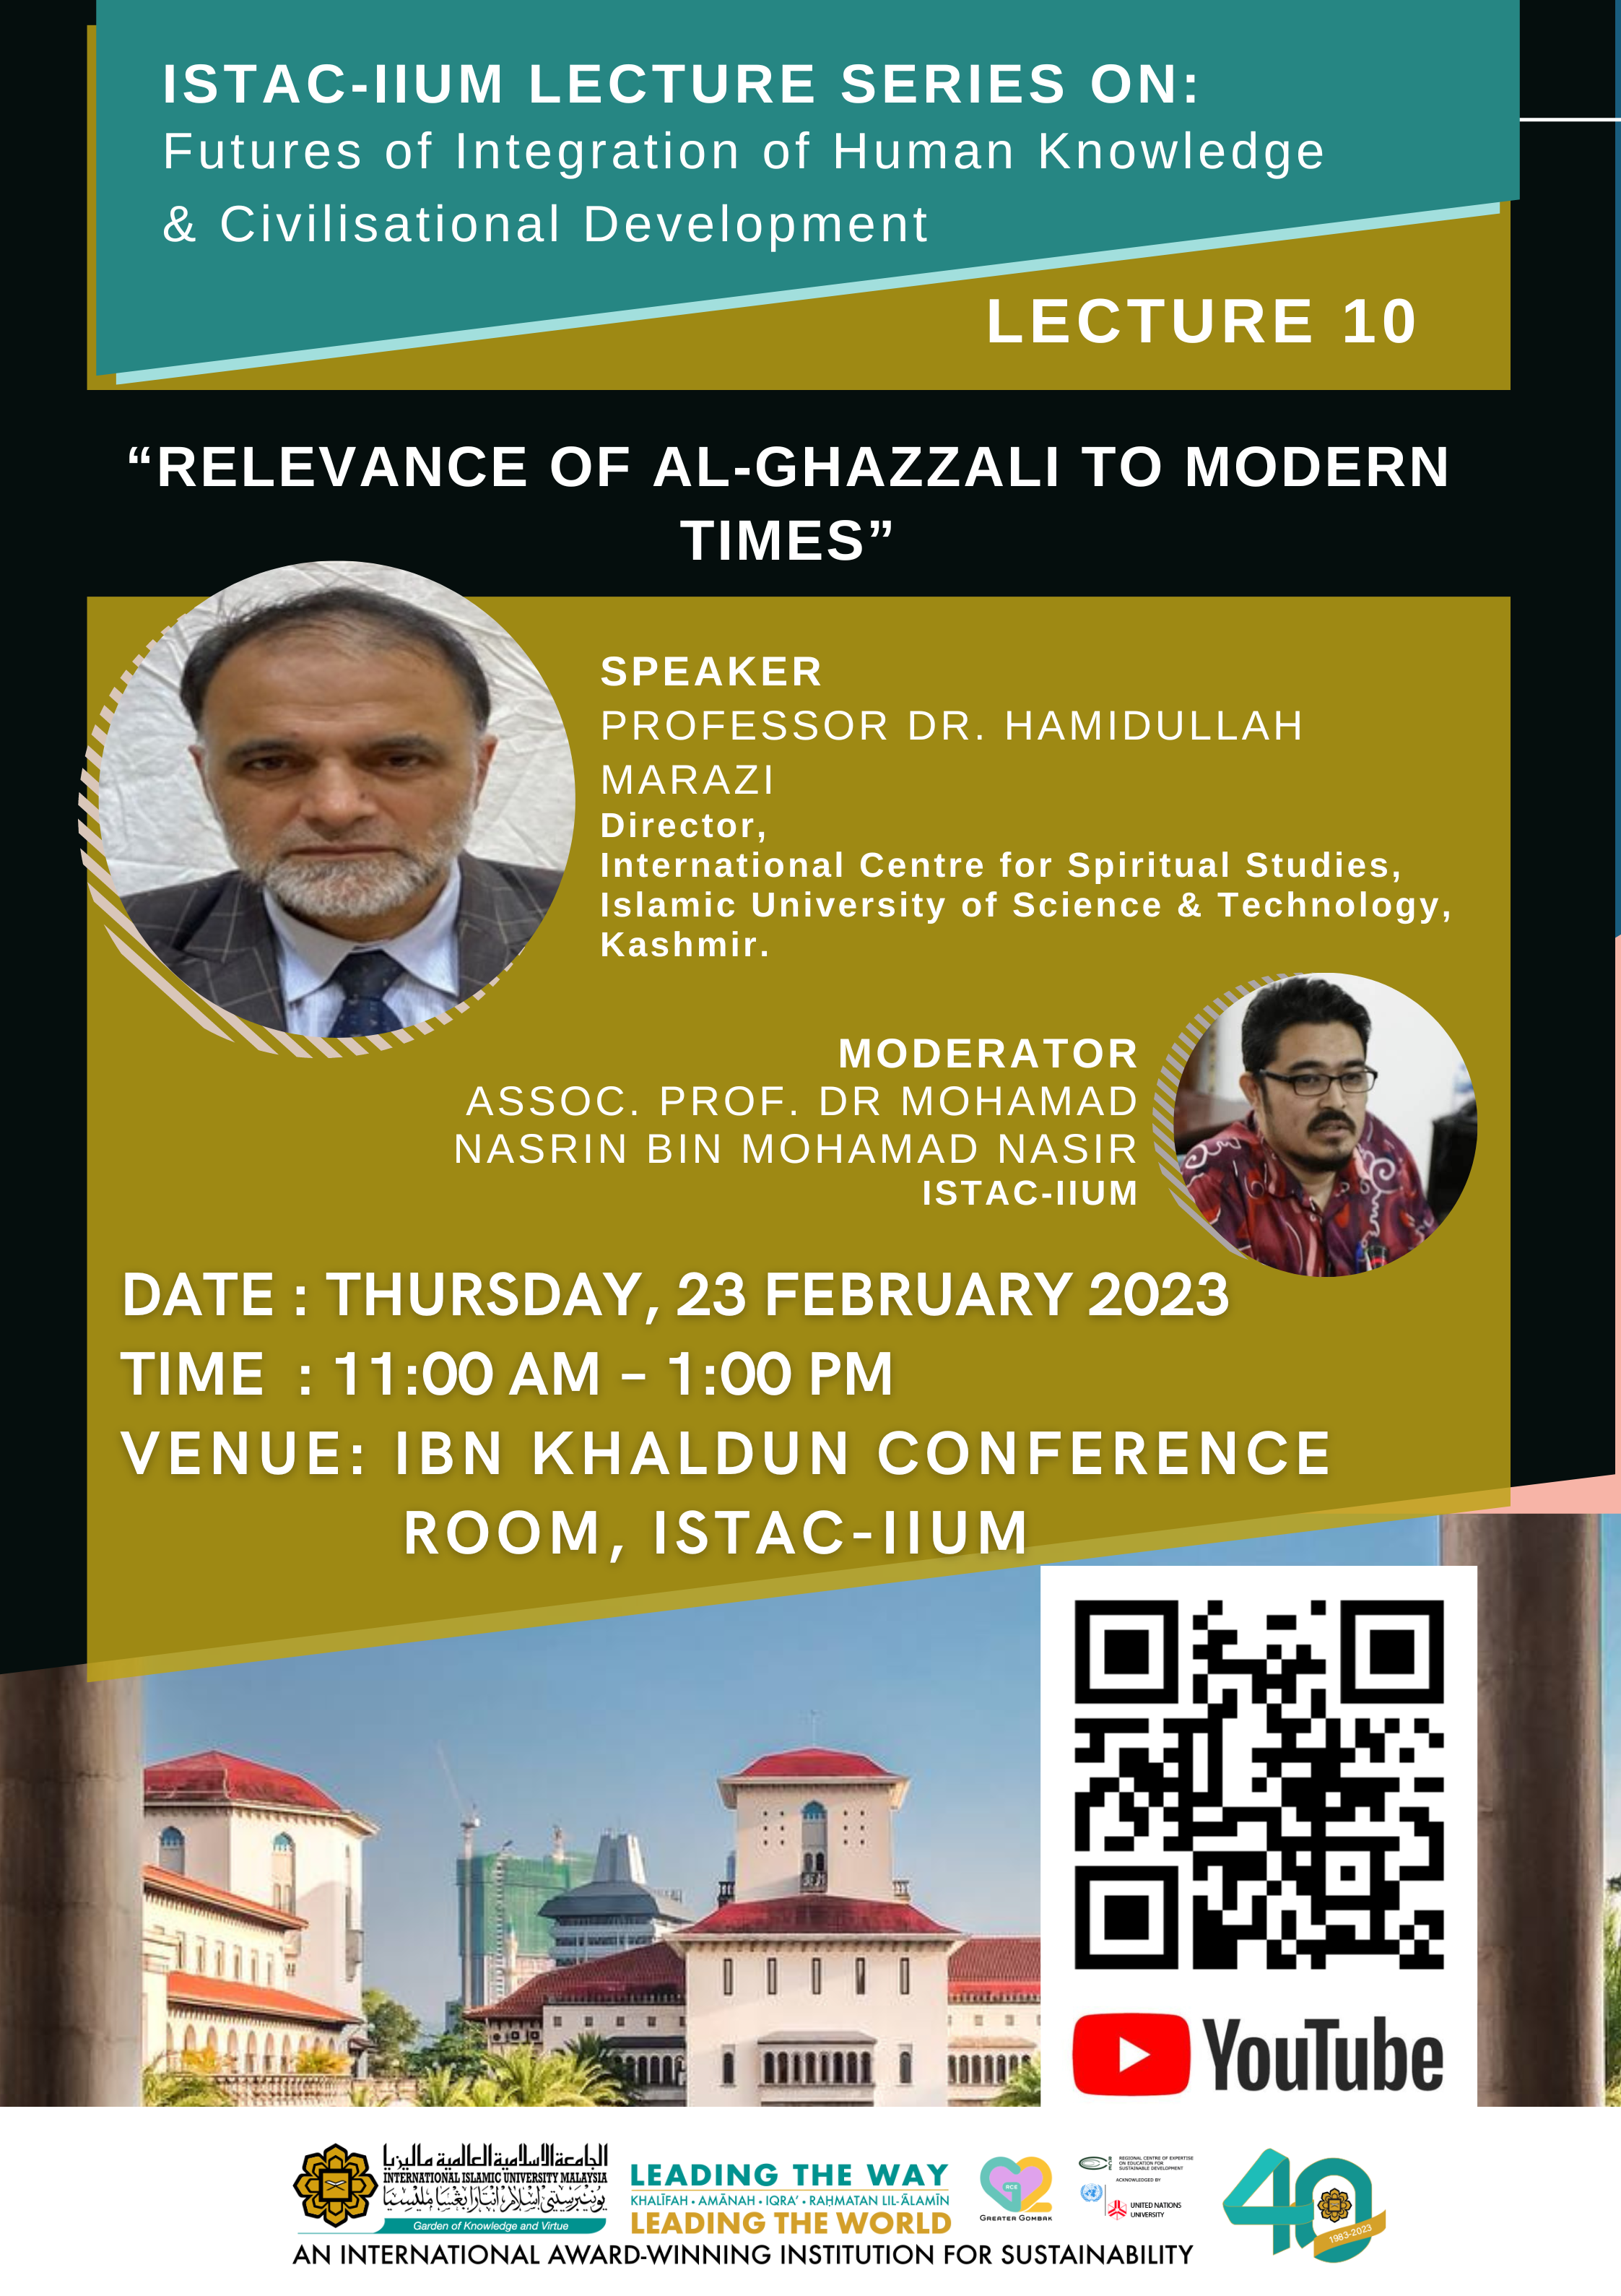 ISTAC-IIUM LECTURE SERIES ON FUTURES OF INTEGRATION OF HUMAN KNOWLEDGE & CIVILISATIONAL DEVELOPMENT_LECTURE 10